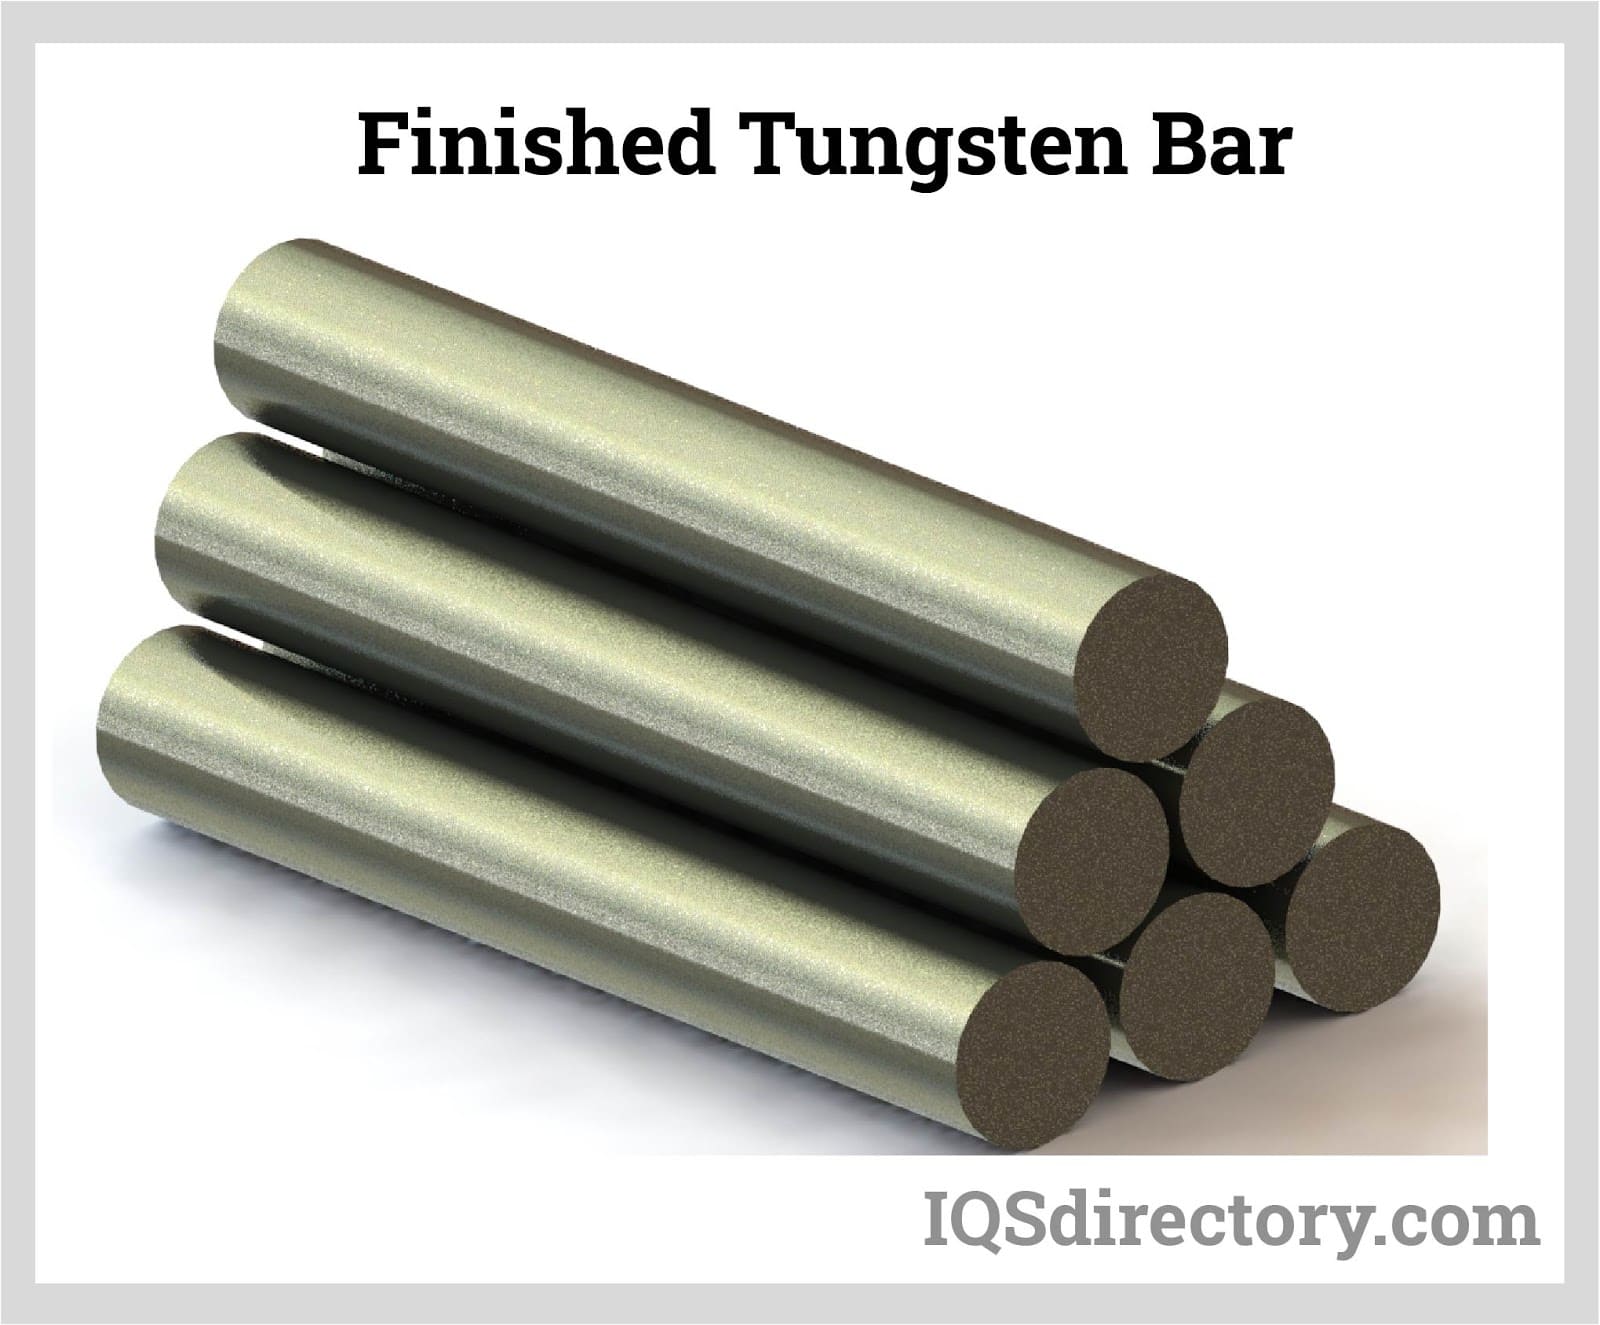 Tungsten Metal: Types, Applications, Advantages, and Properties